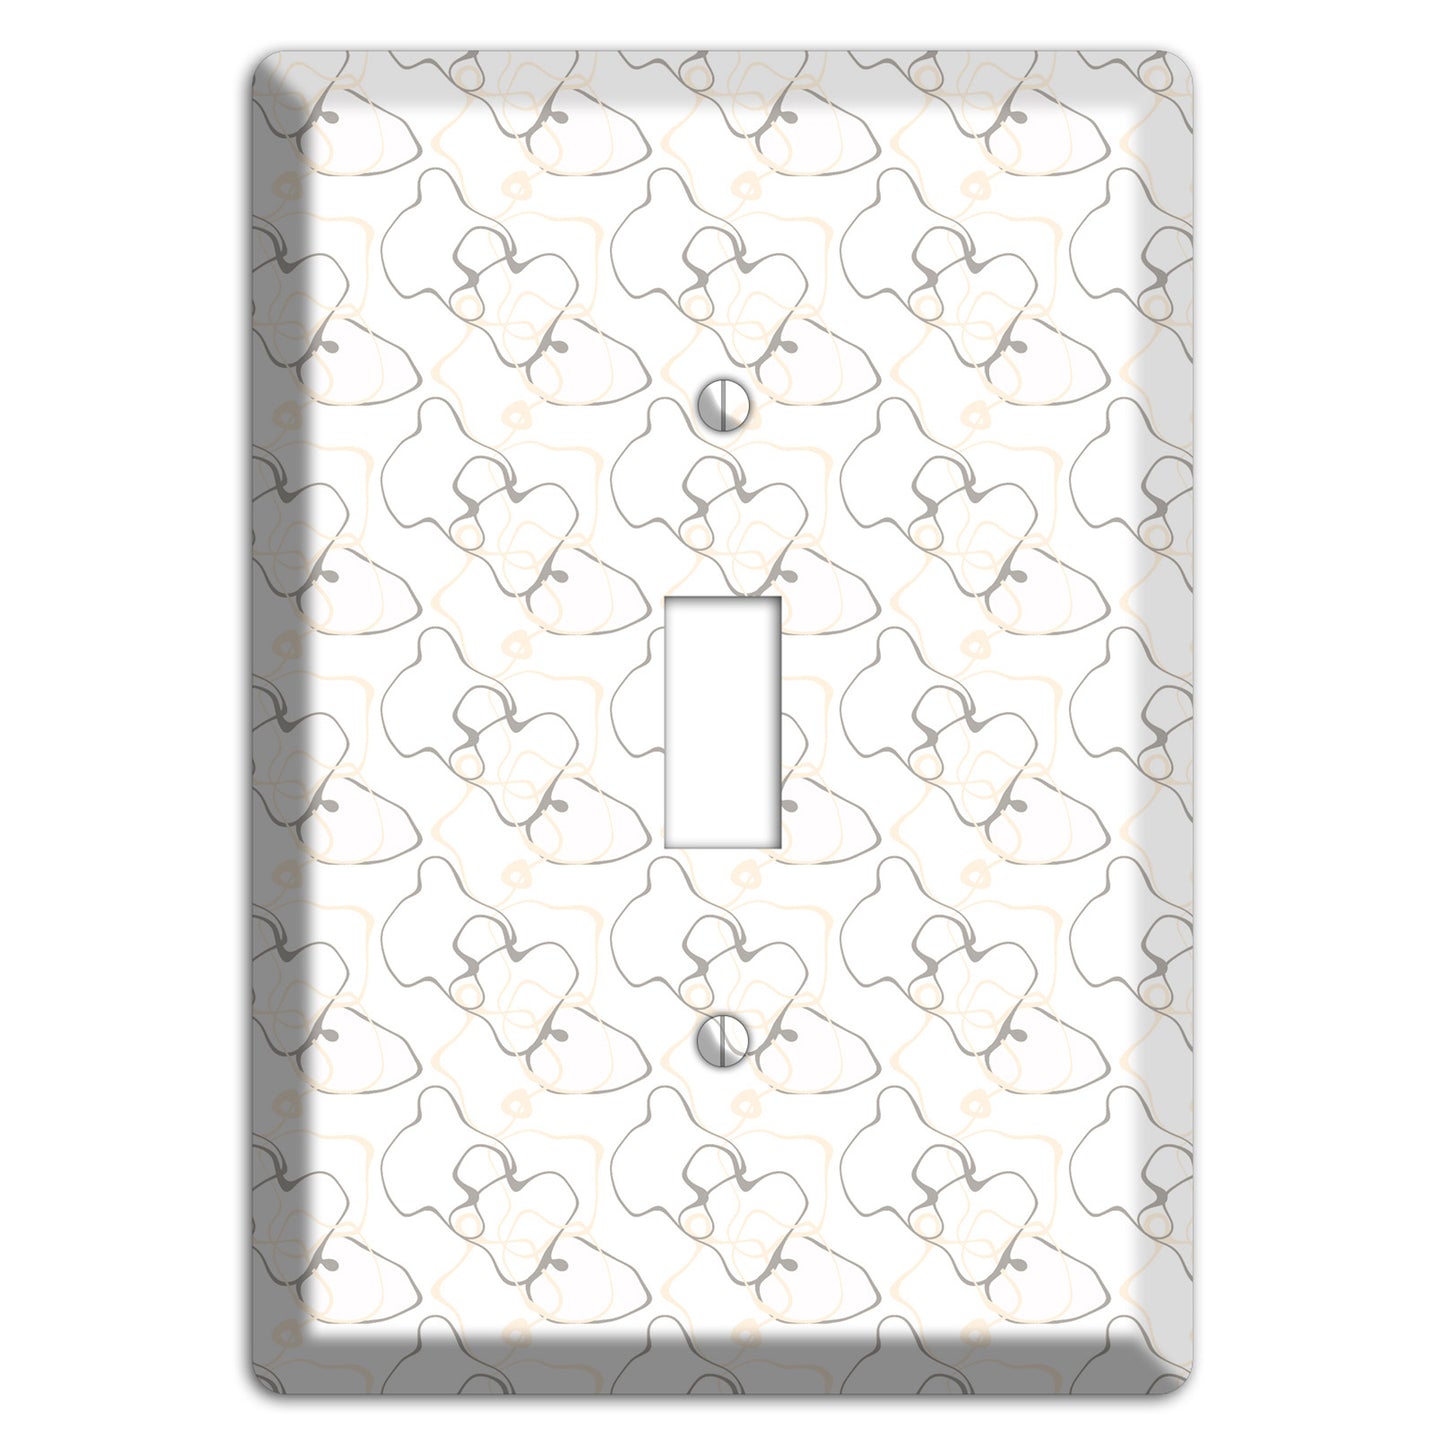 White with Irregular Circles Cover Plates